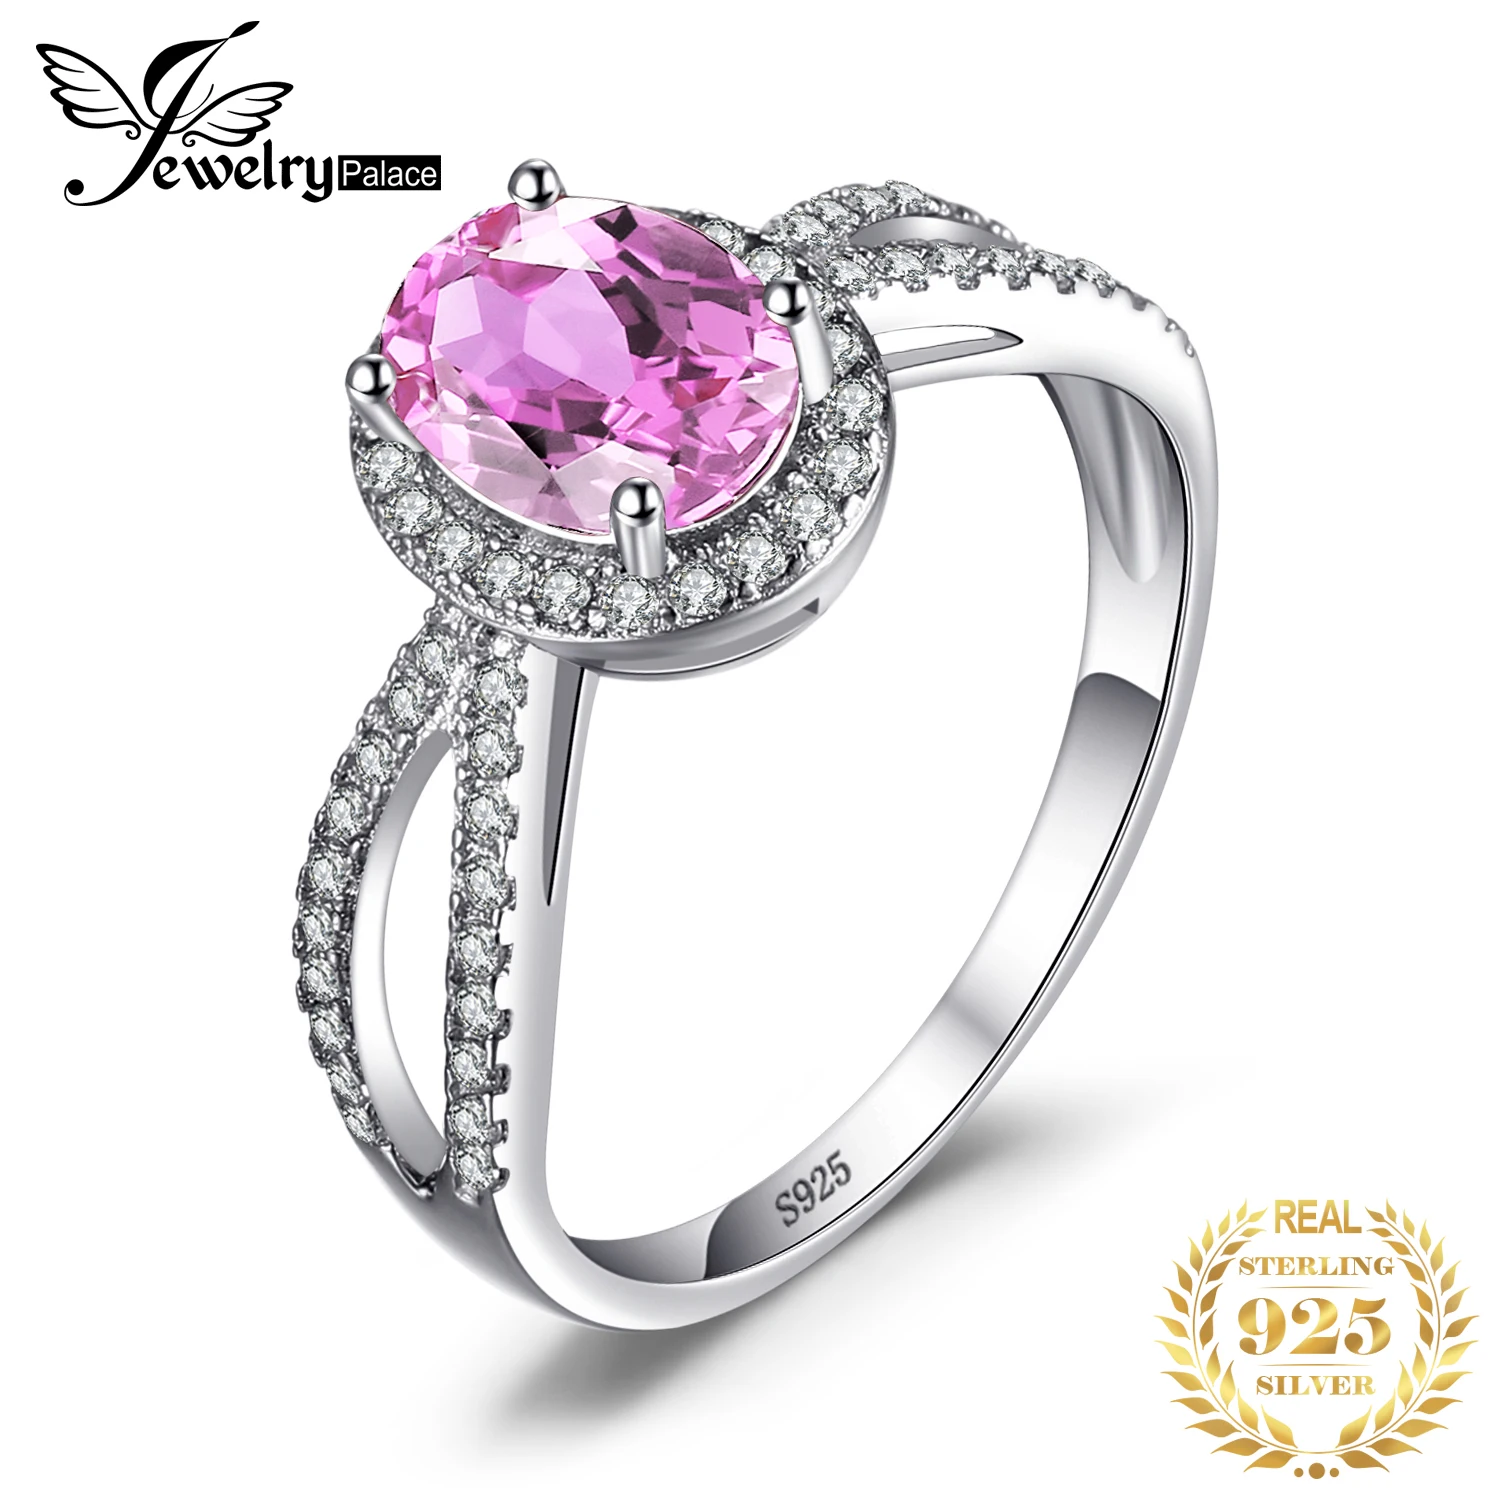 

JewelryPalace Oval 1.7ct Created Pink Sapphire 925 Sterling Silver Halo Ring for Women Gemstone Engagement Wedding Jewelry Gift